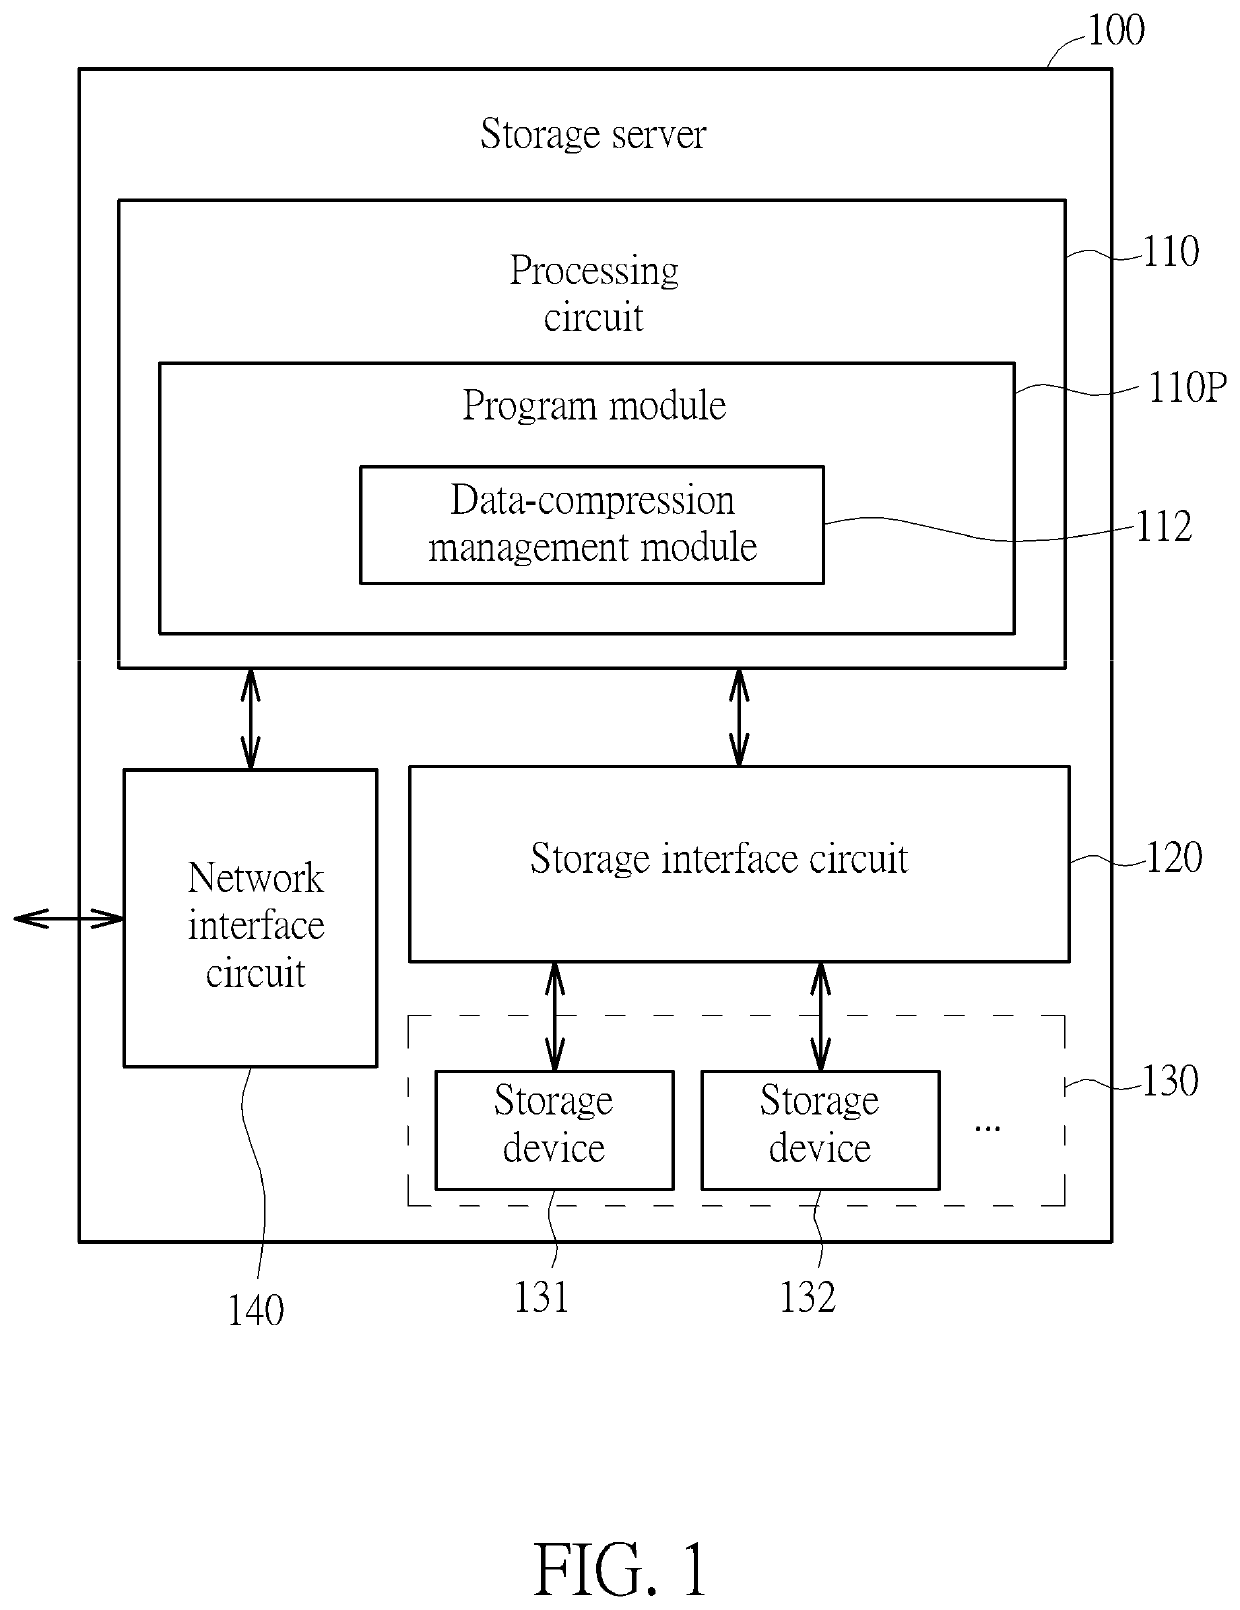 Method and apparatus for performing data-compression management in a storage server